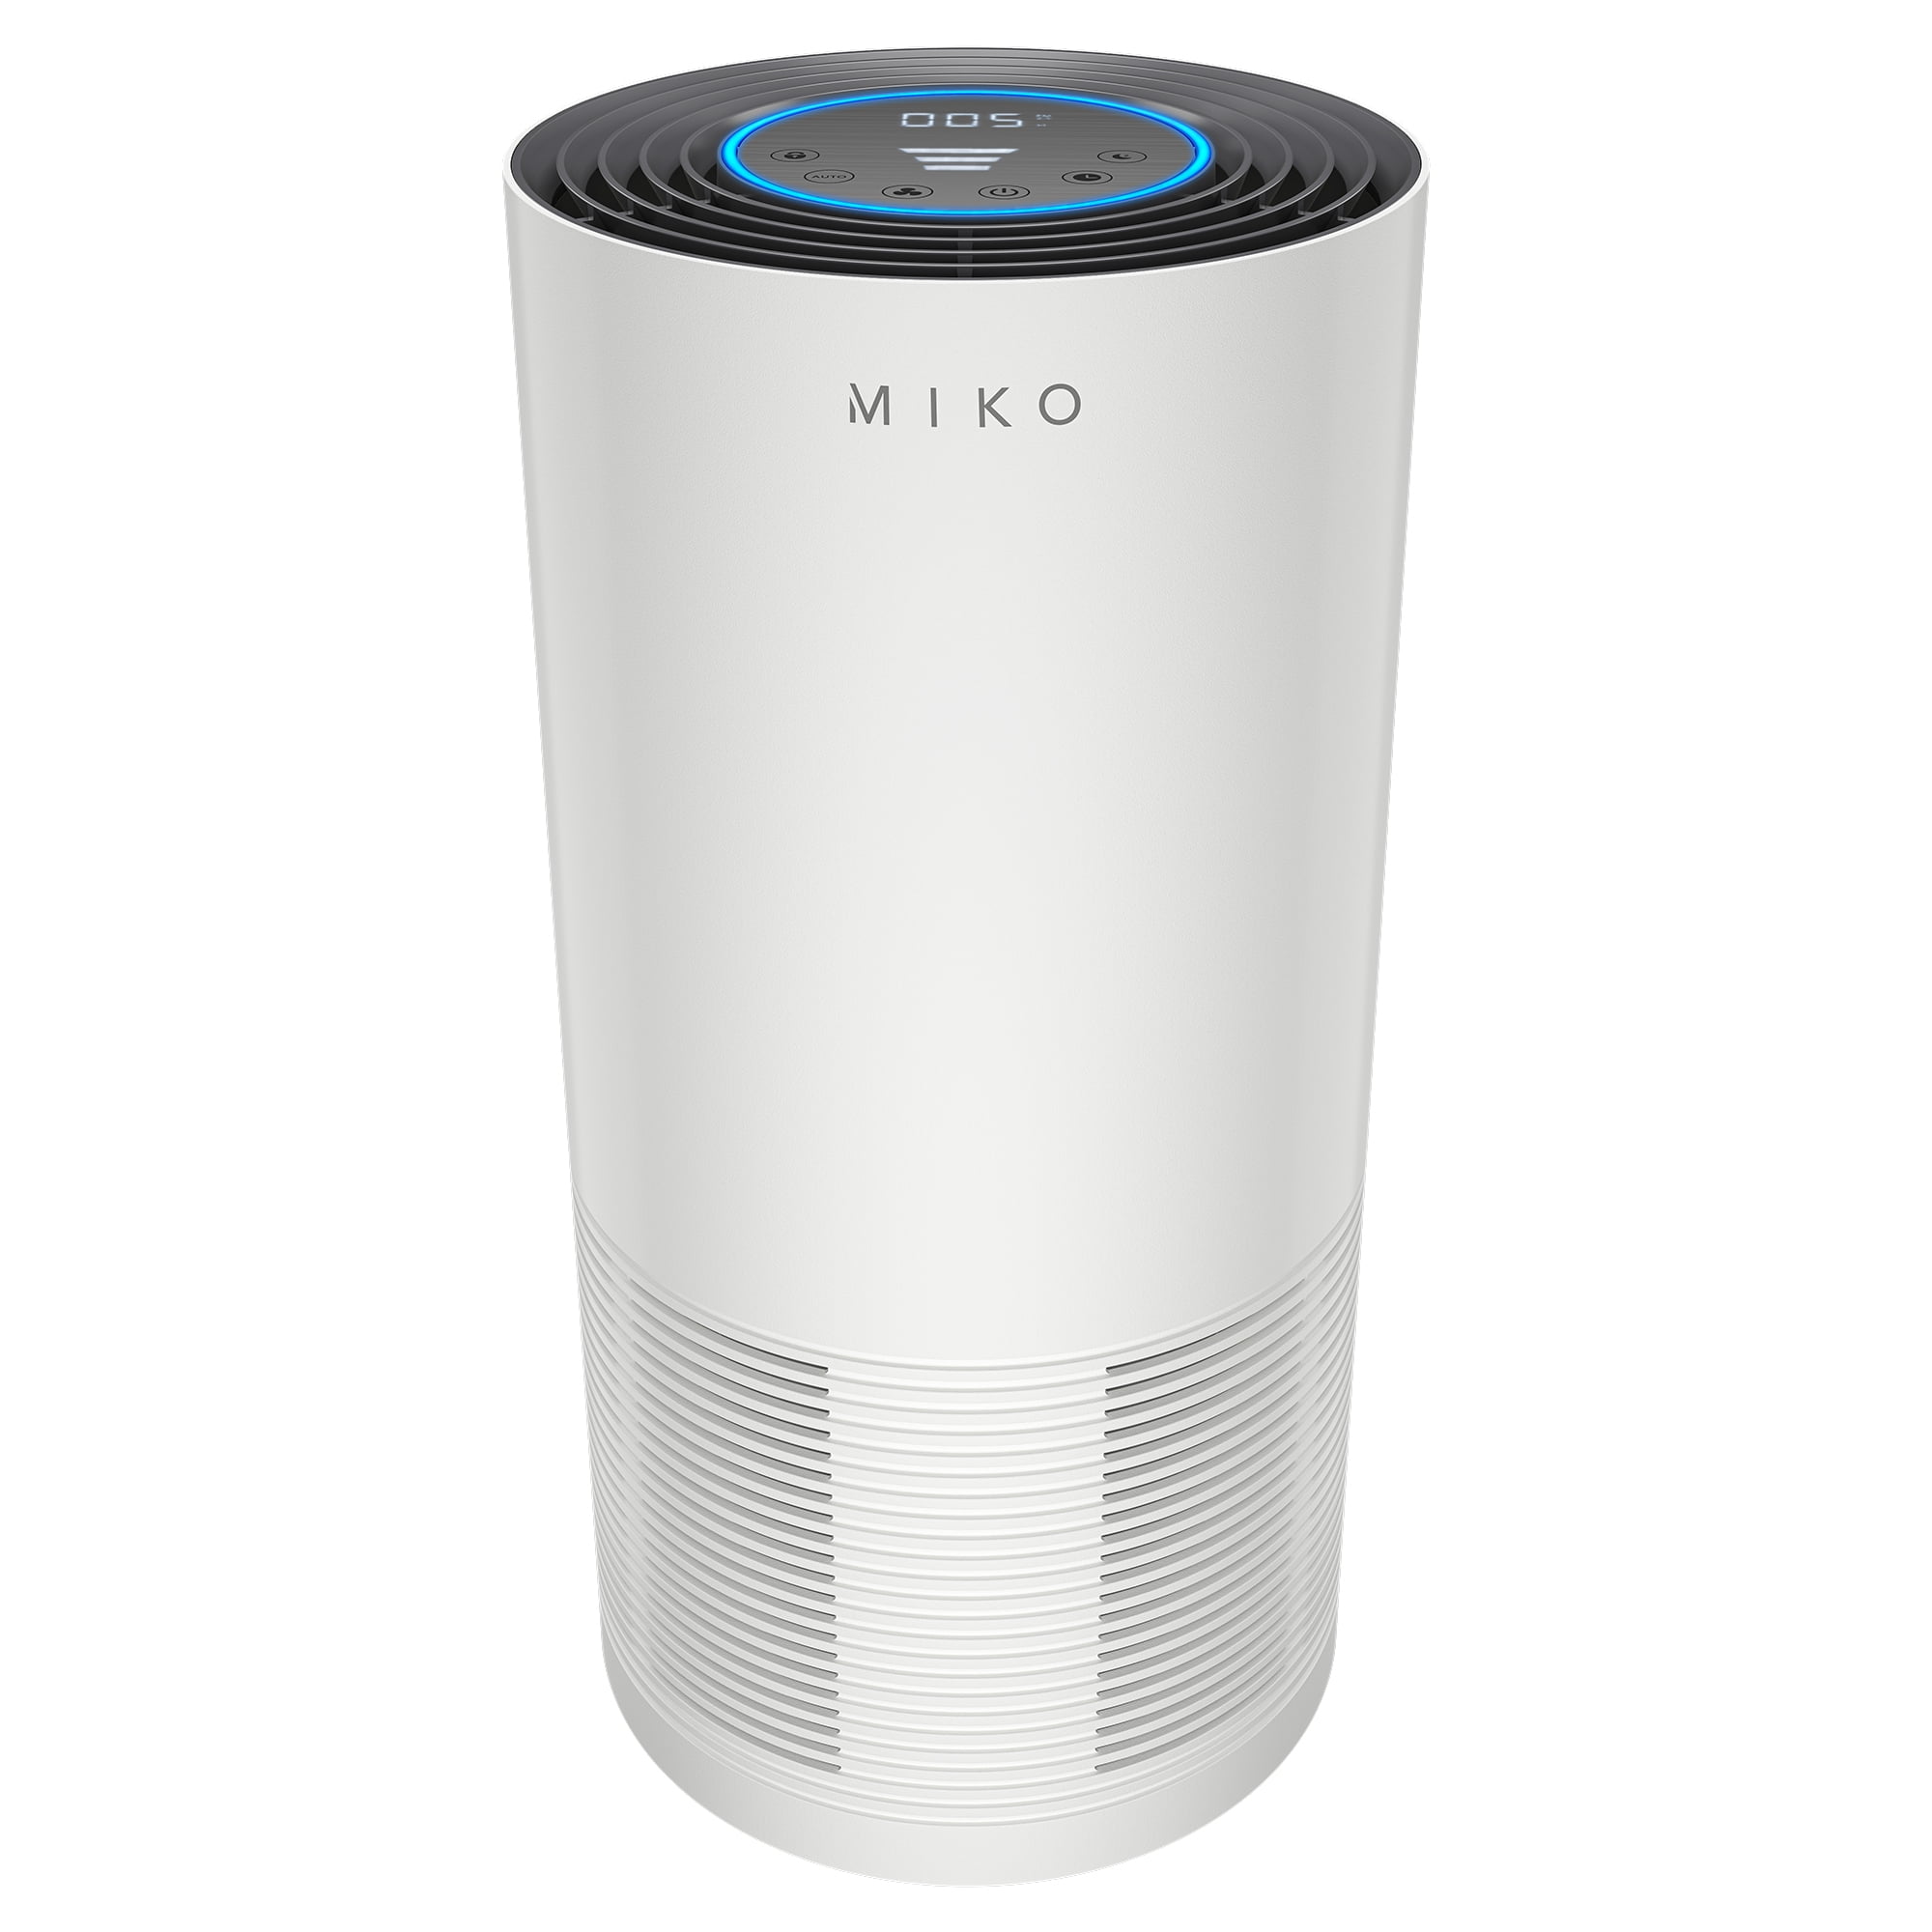 Mi Air Purifier 3H for home, high efficiency filter eliminate 99.97% smoke  pollen dust, quiet for large space up to 484sq ft, for living room, bedroom